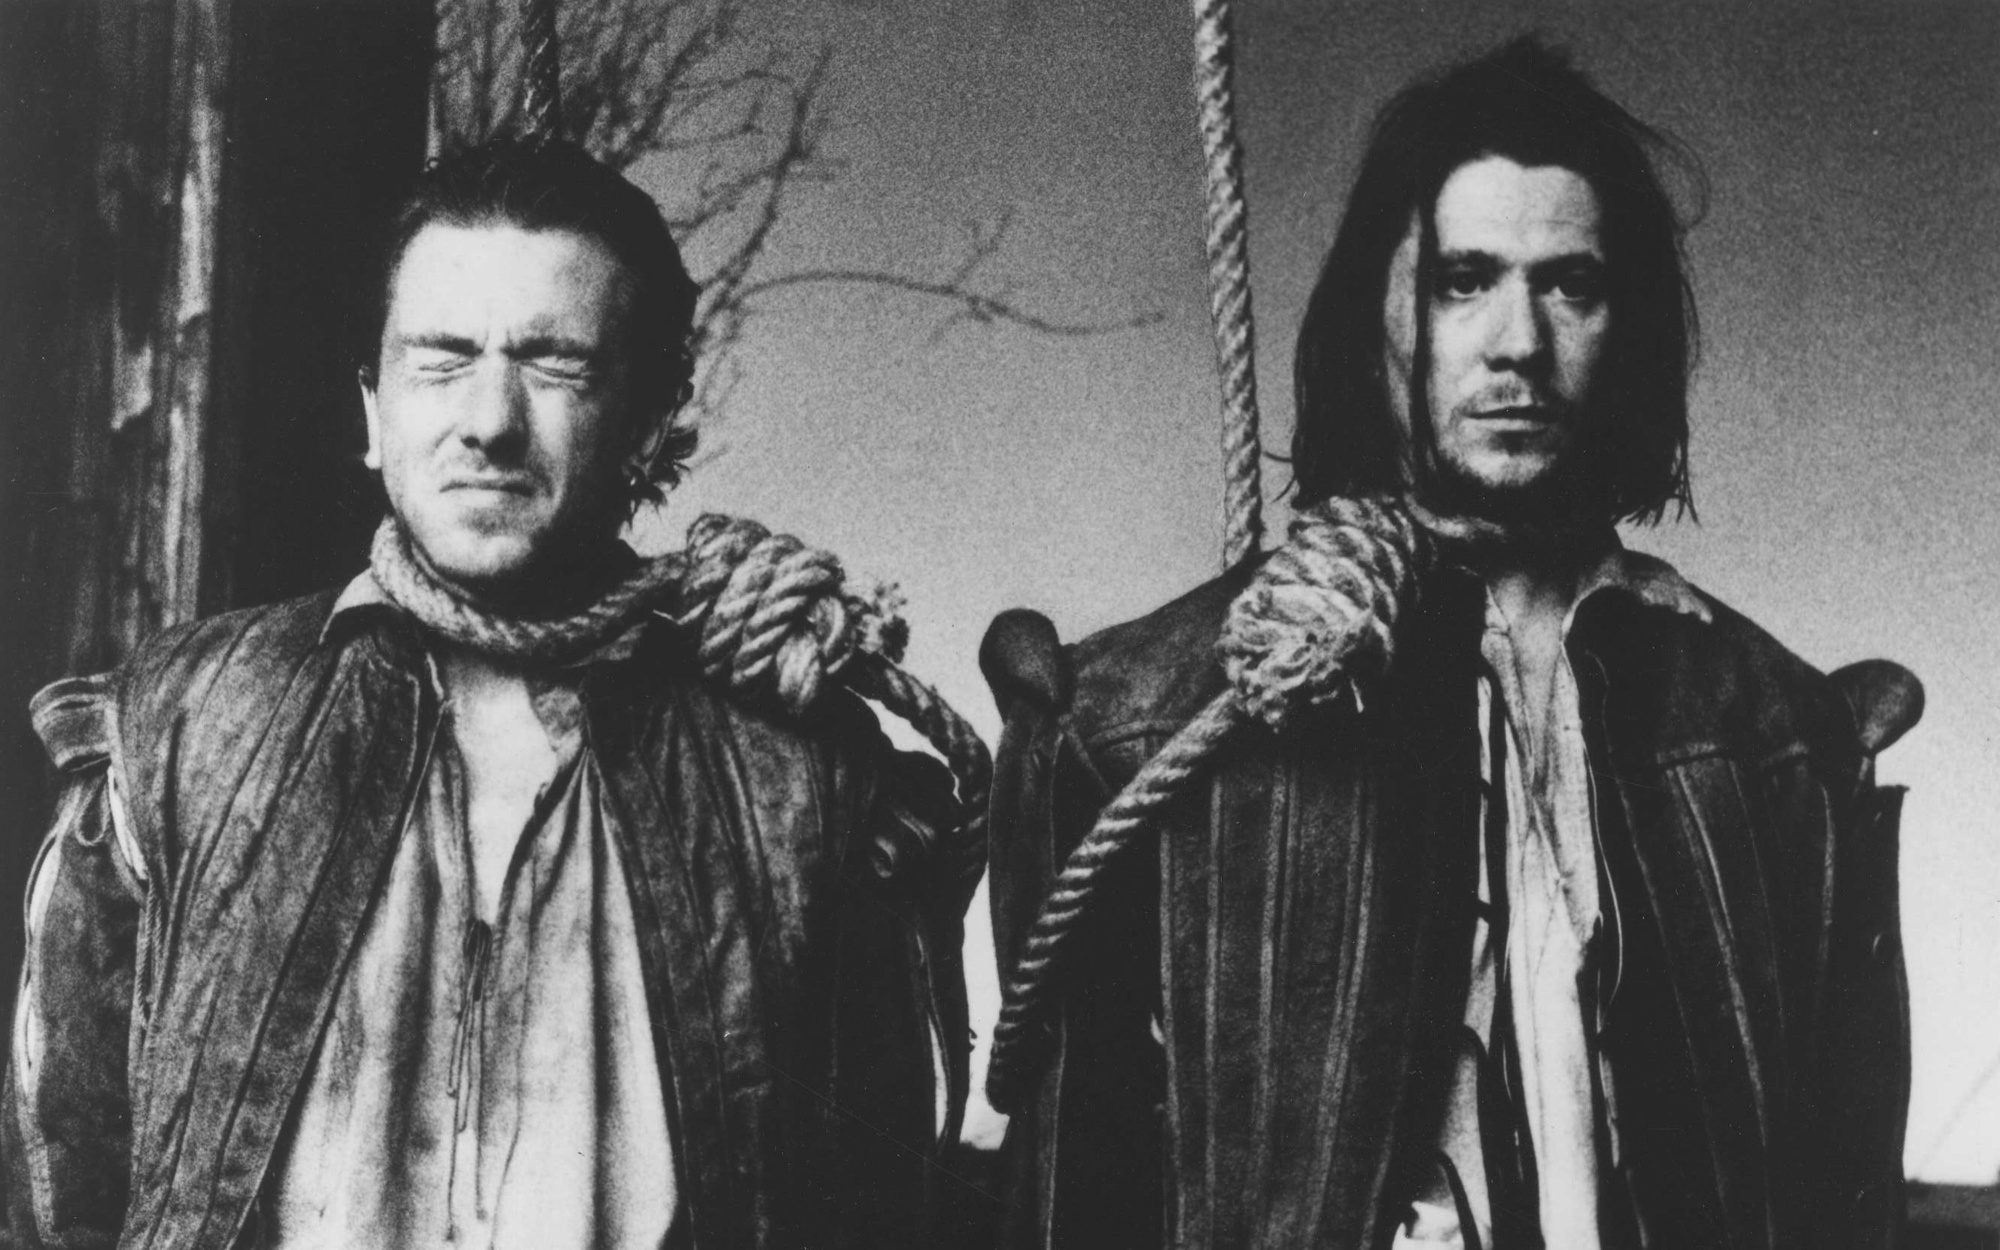 Gary Oldman and Tim Roth in "Rosencrantz and Guildenstern are dead"